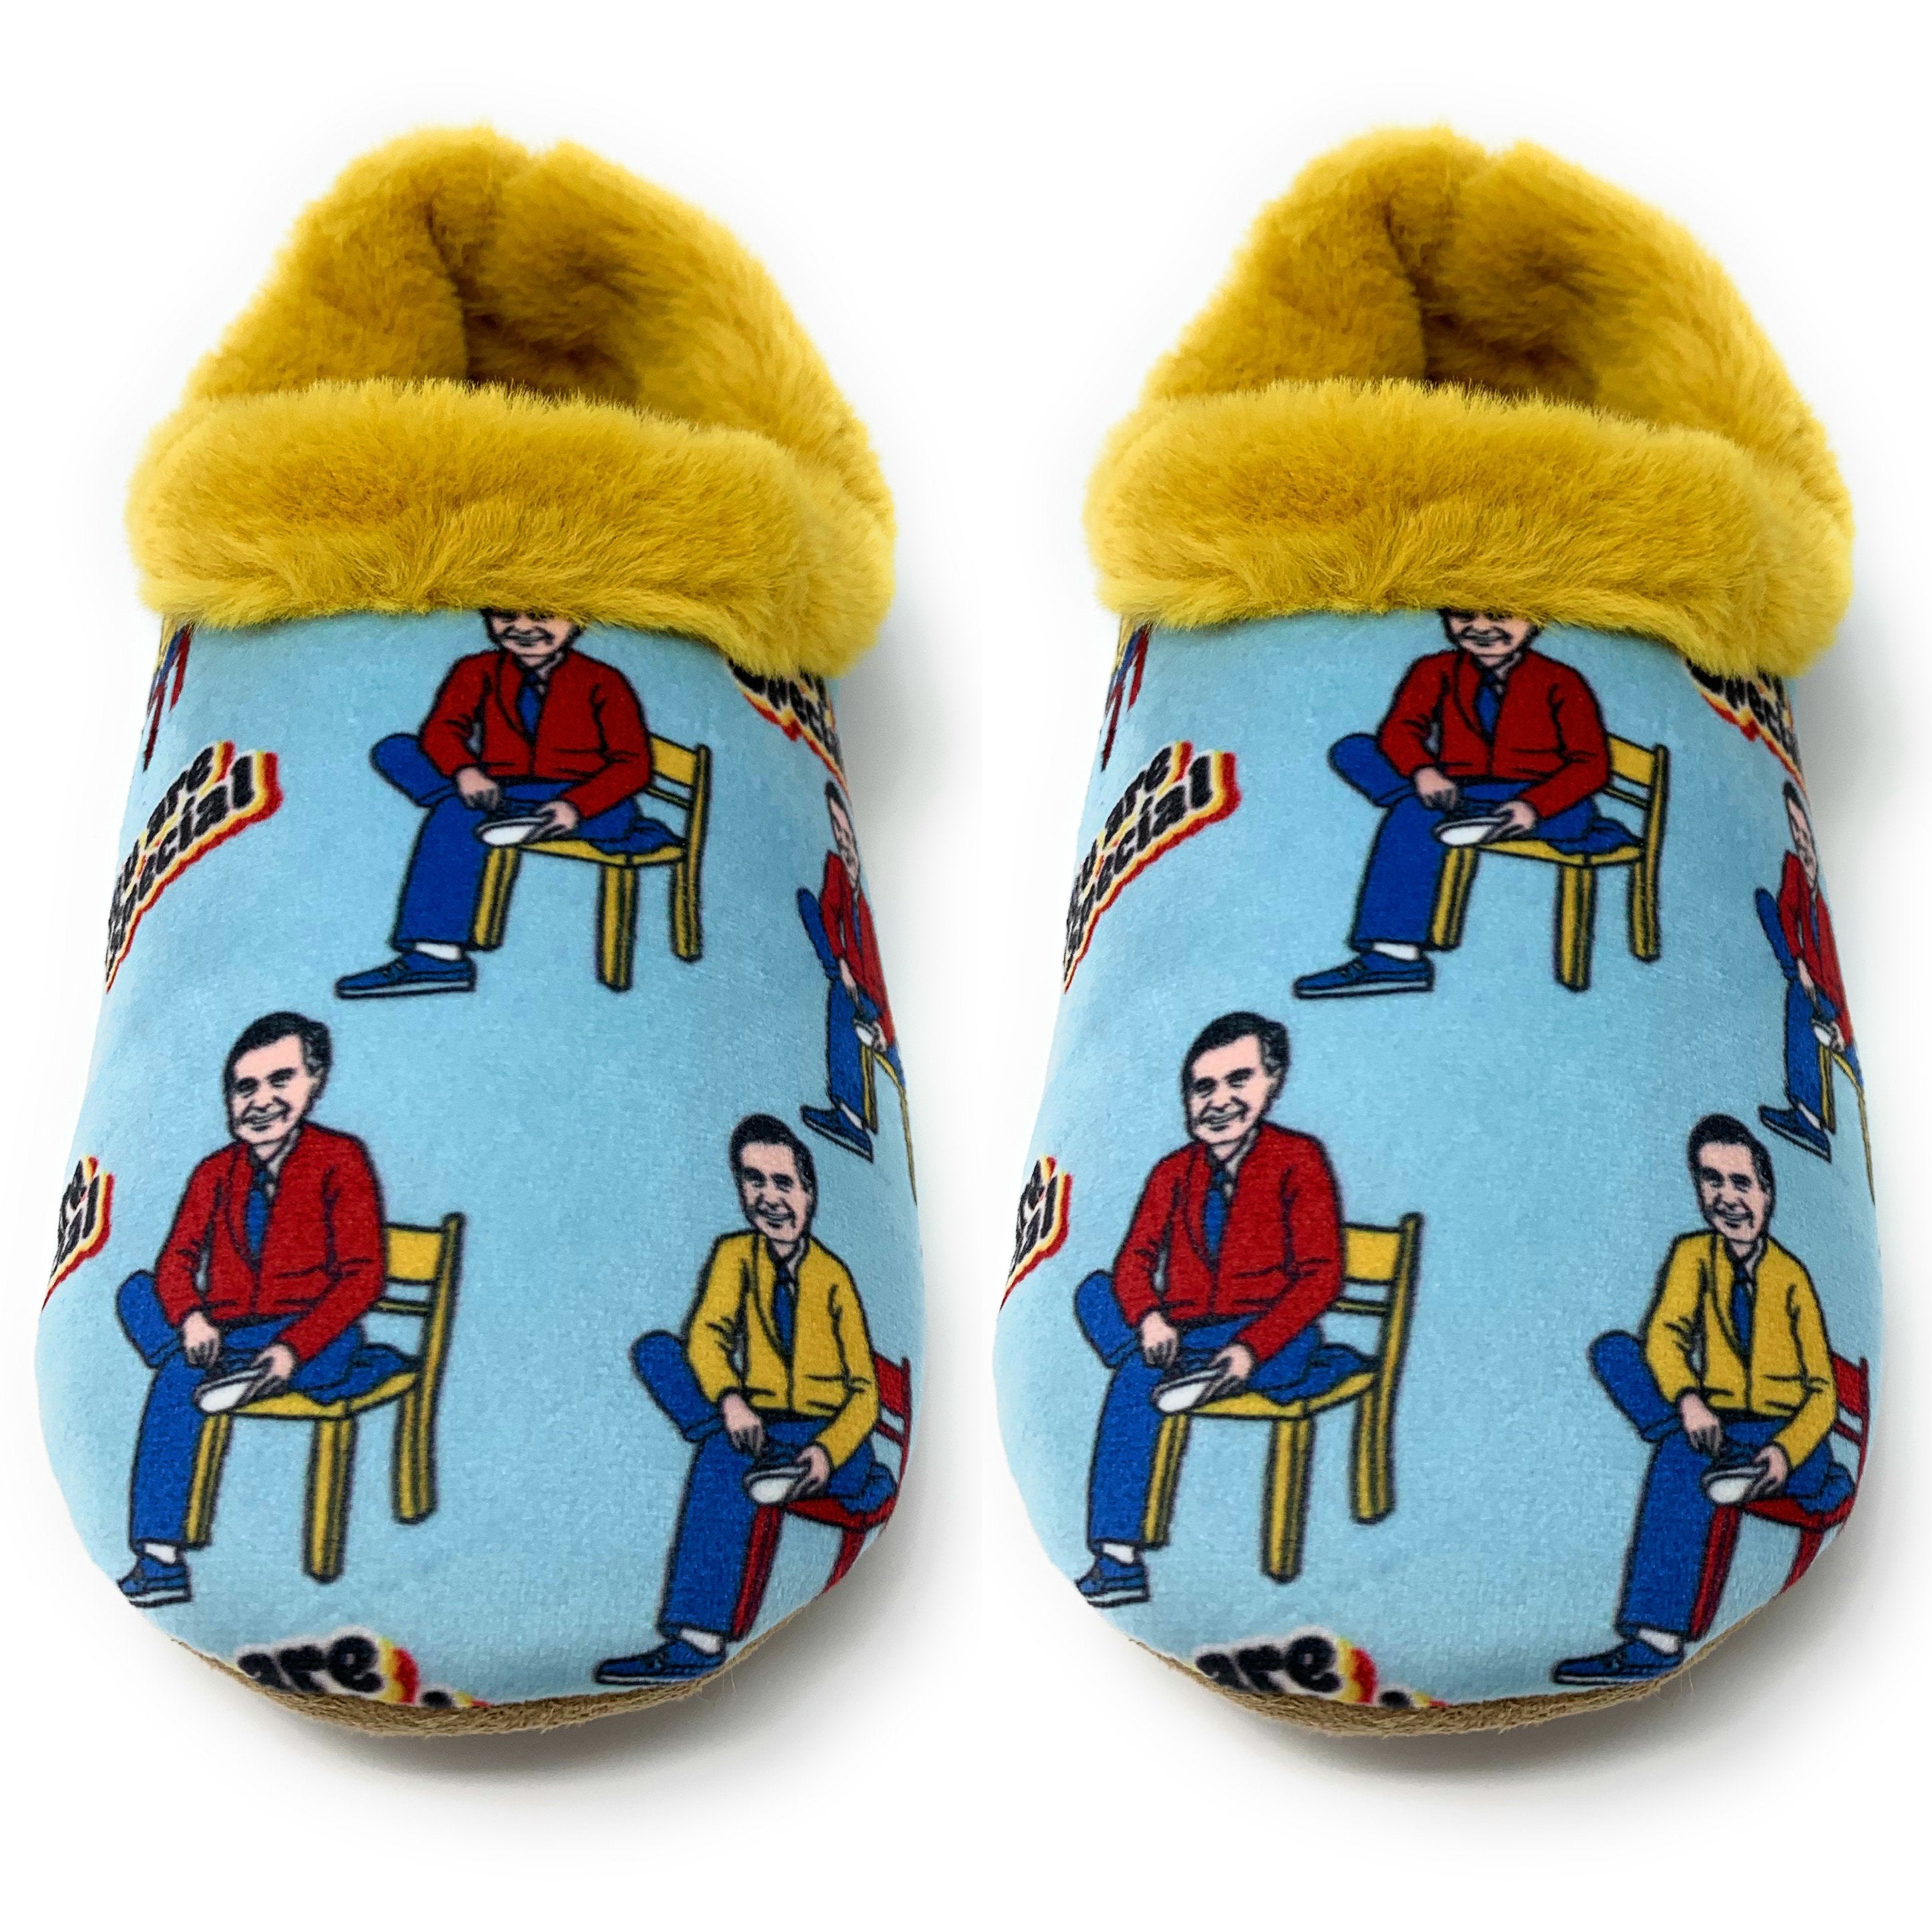 you-are-special-womens-slippers-2-oooh-yeah-socks